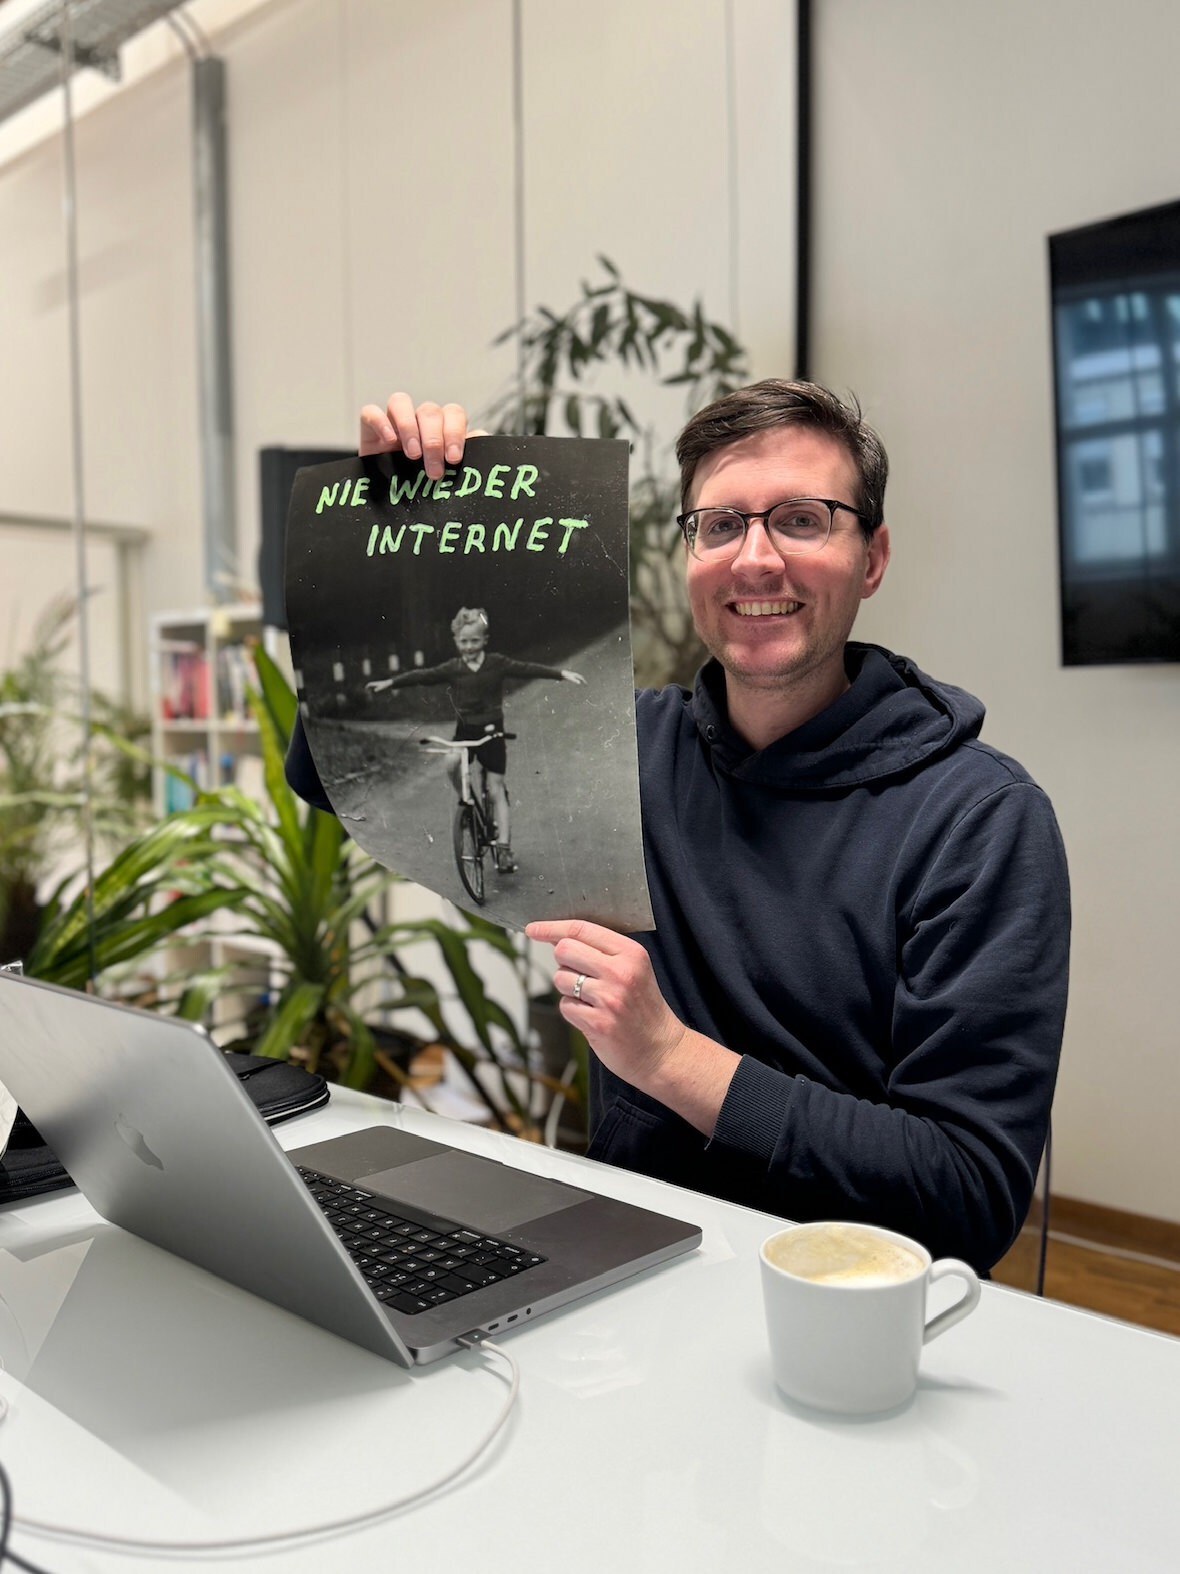 One person in a meeting room, smiling and holding a poster that shows a child riding a bicycle with the handwritten caption “Nie wieder Internet”, emphasizing the joy of an analog lifestyle